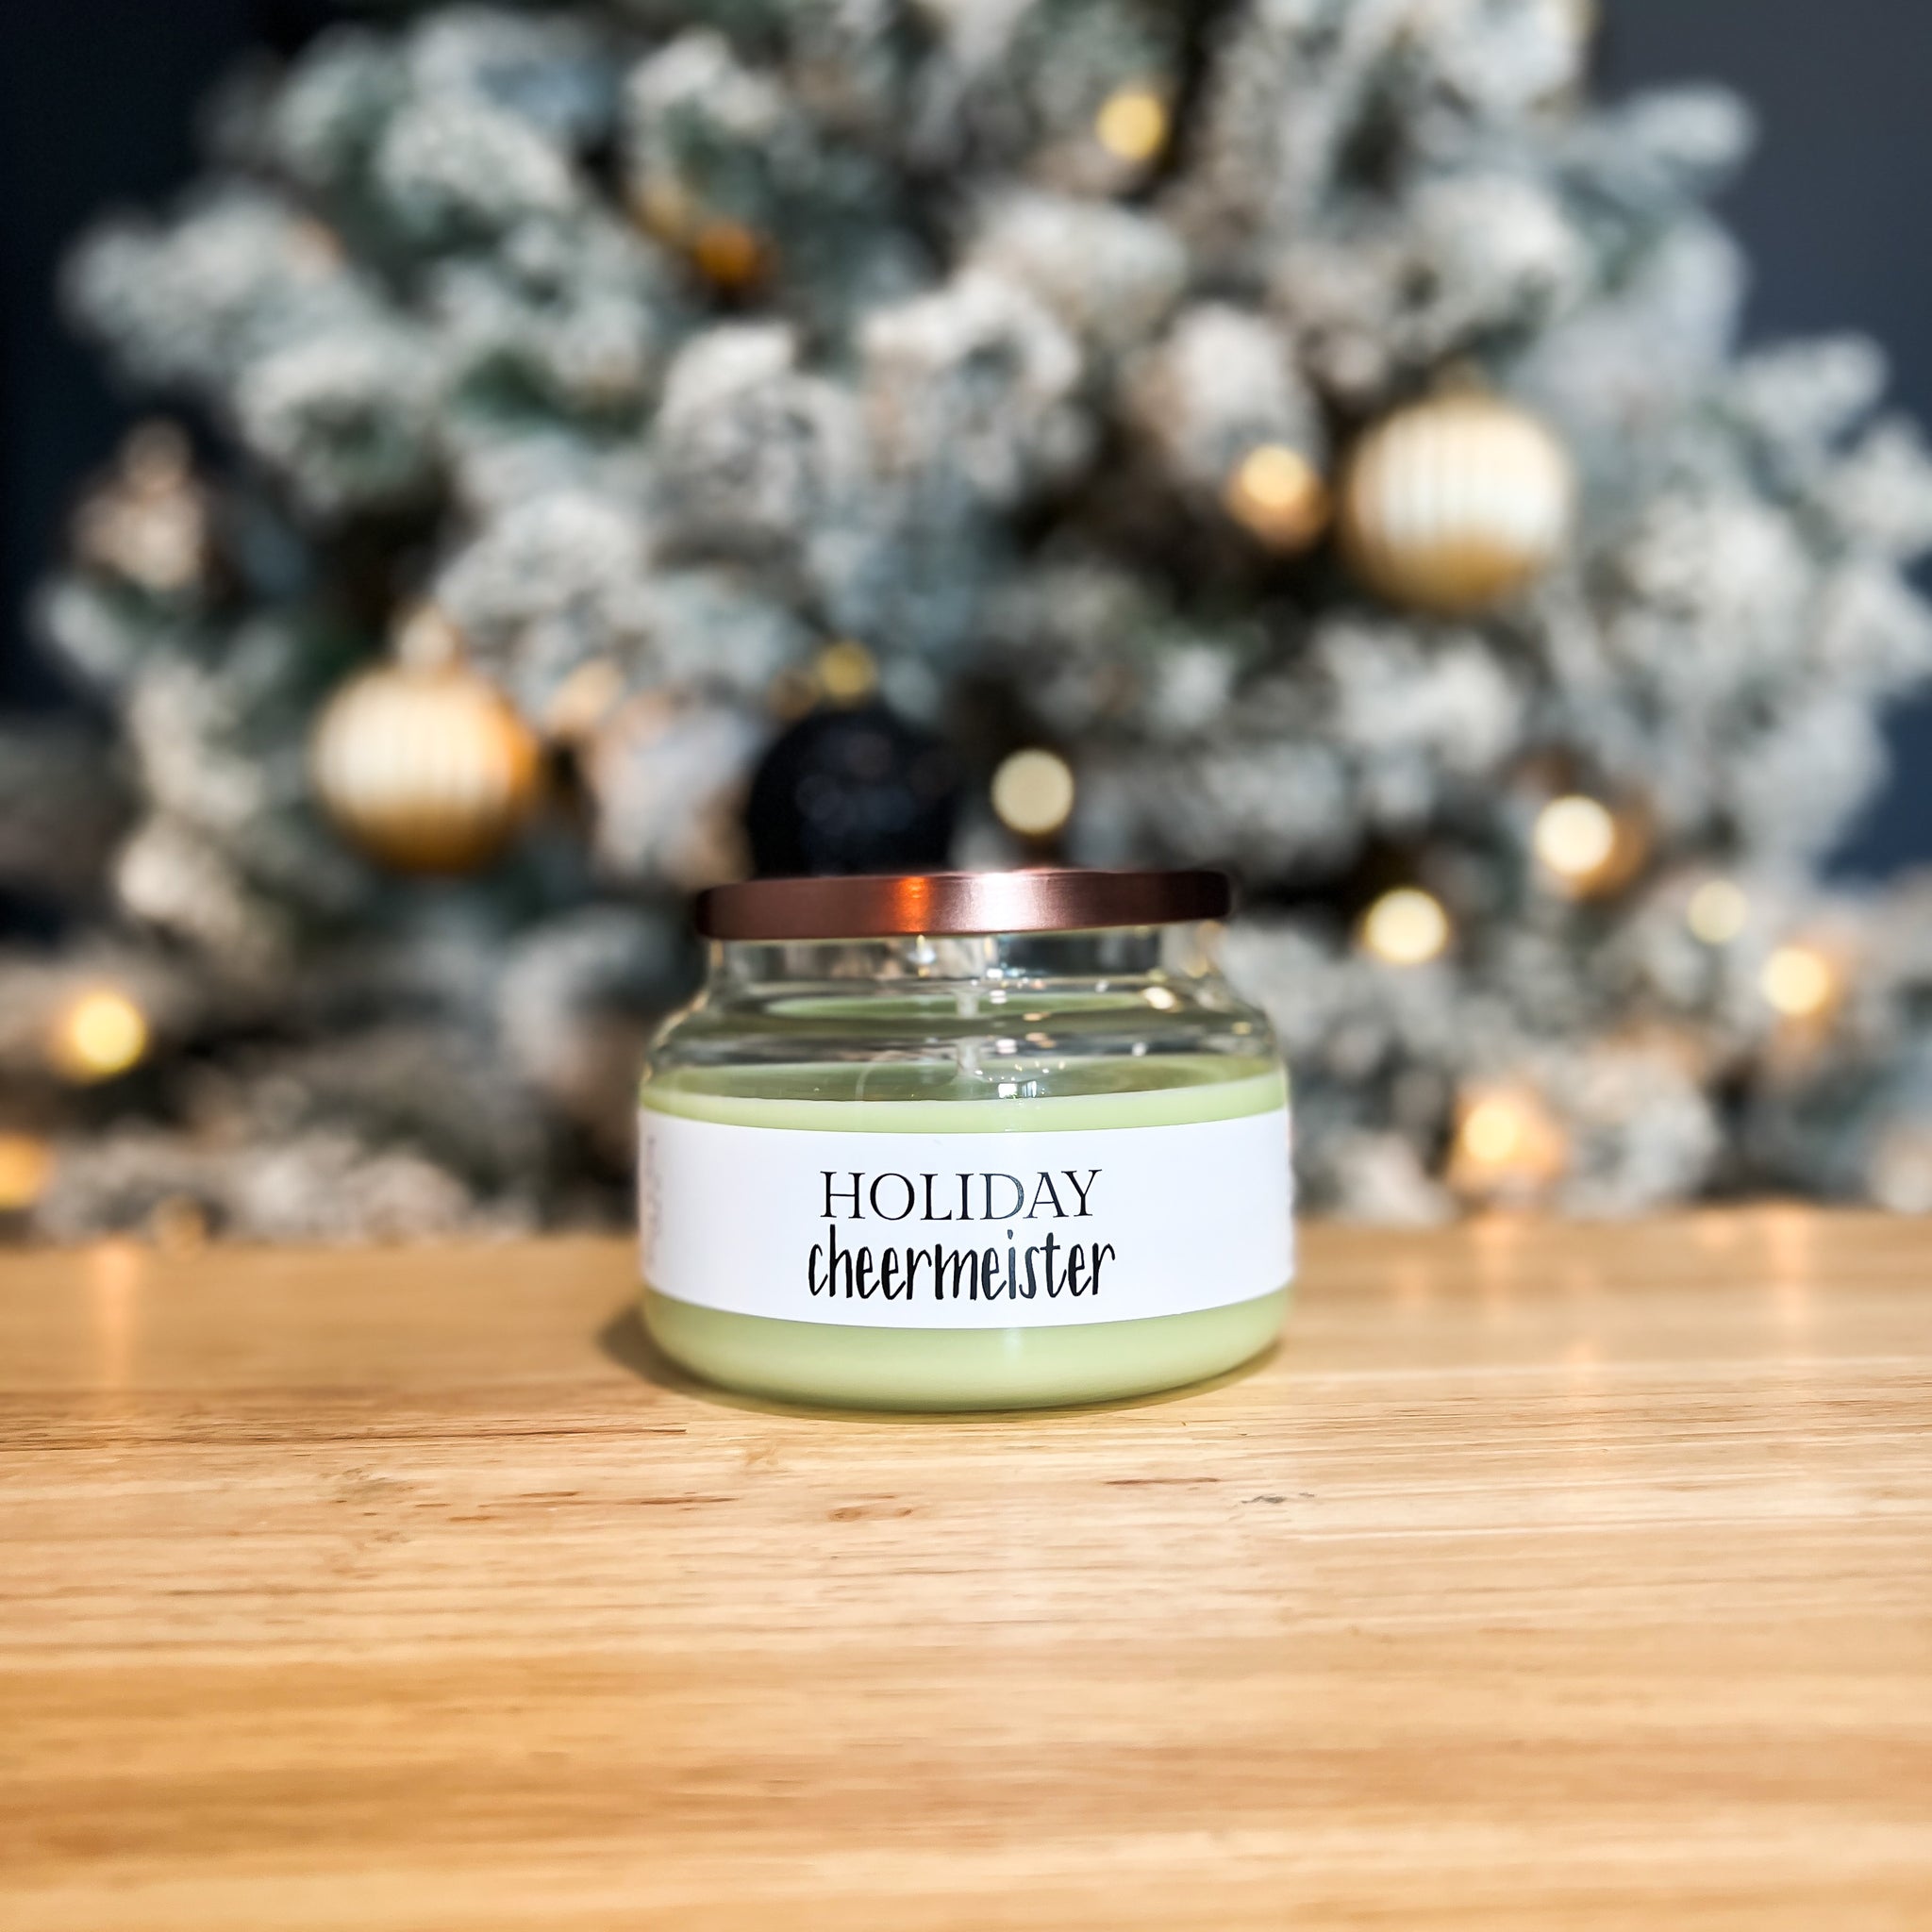 Clear, eight ounce, evergreen trees, citrus, clove, and nutemeg scented, green soy wax candle with a white label and bronze lid